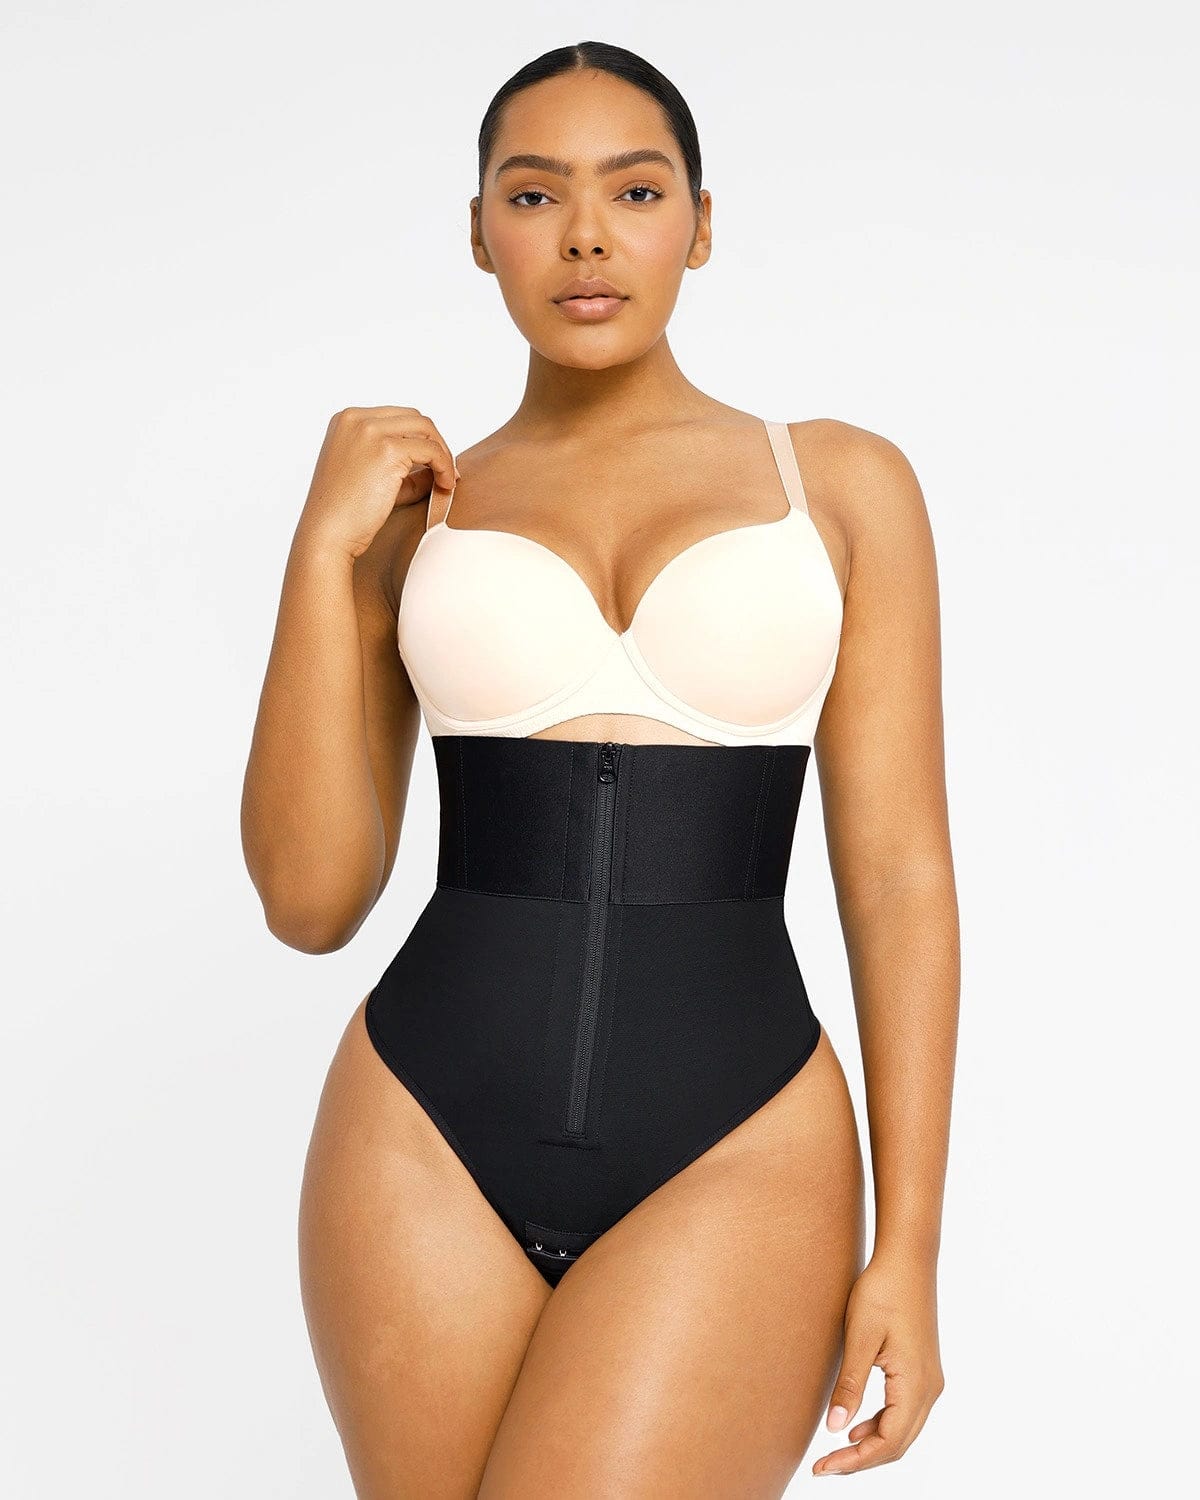 AirSlim™ Lace Smooth Panty Bodysuit, Shapellx